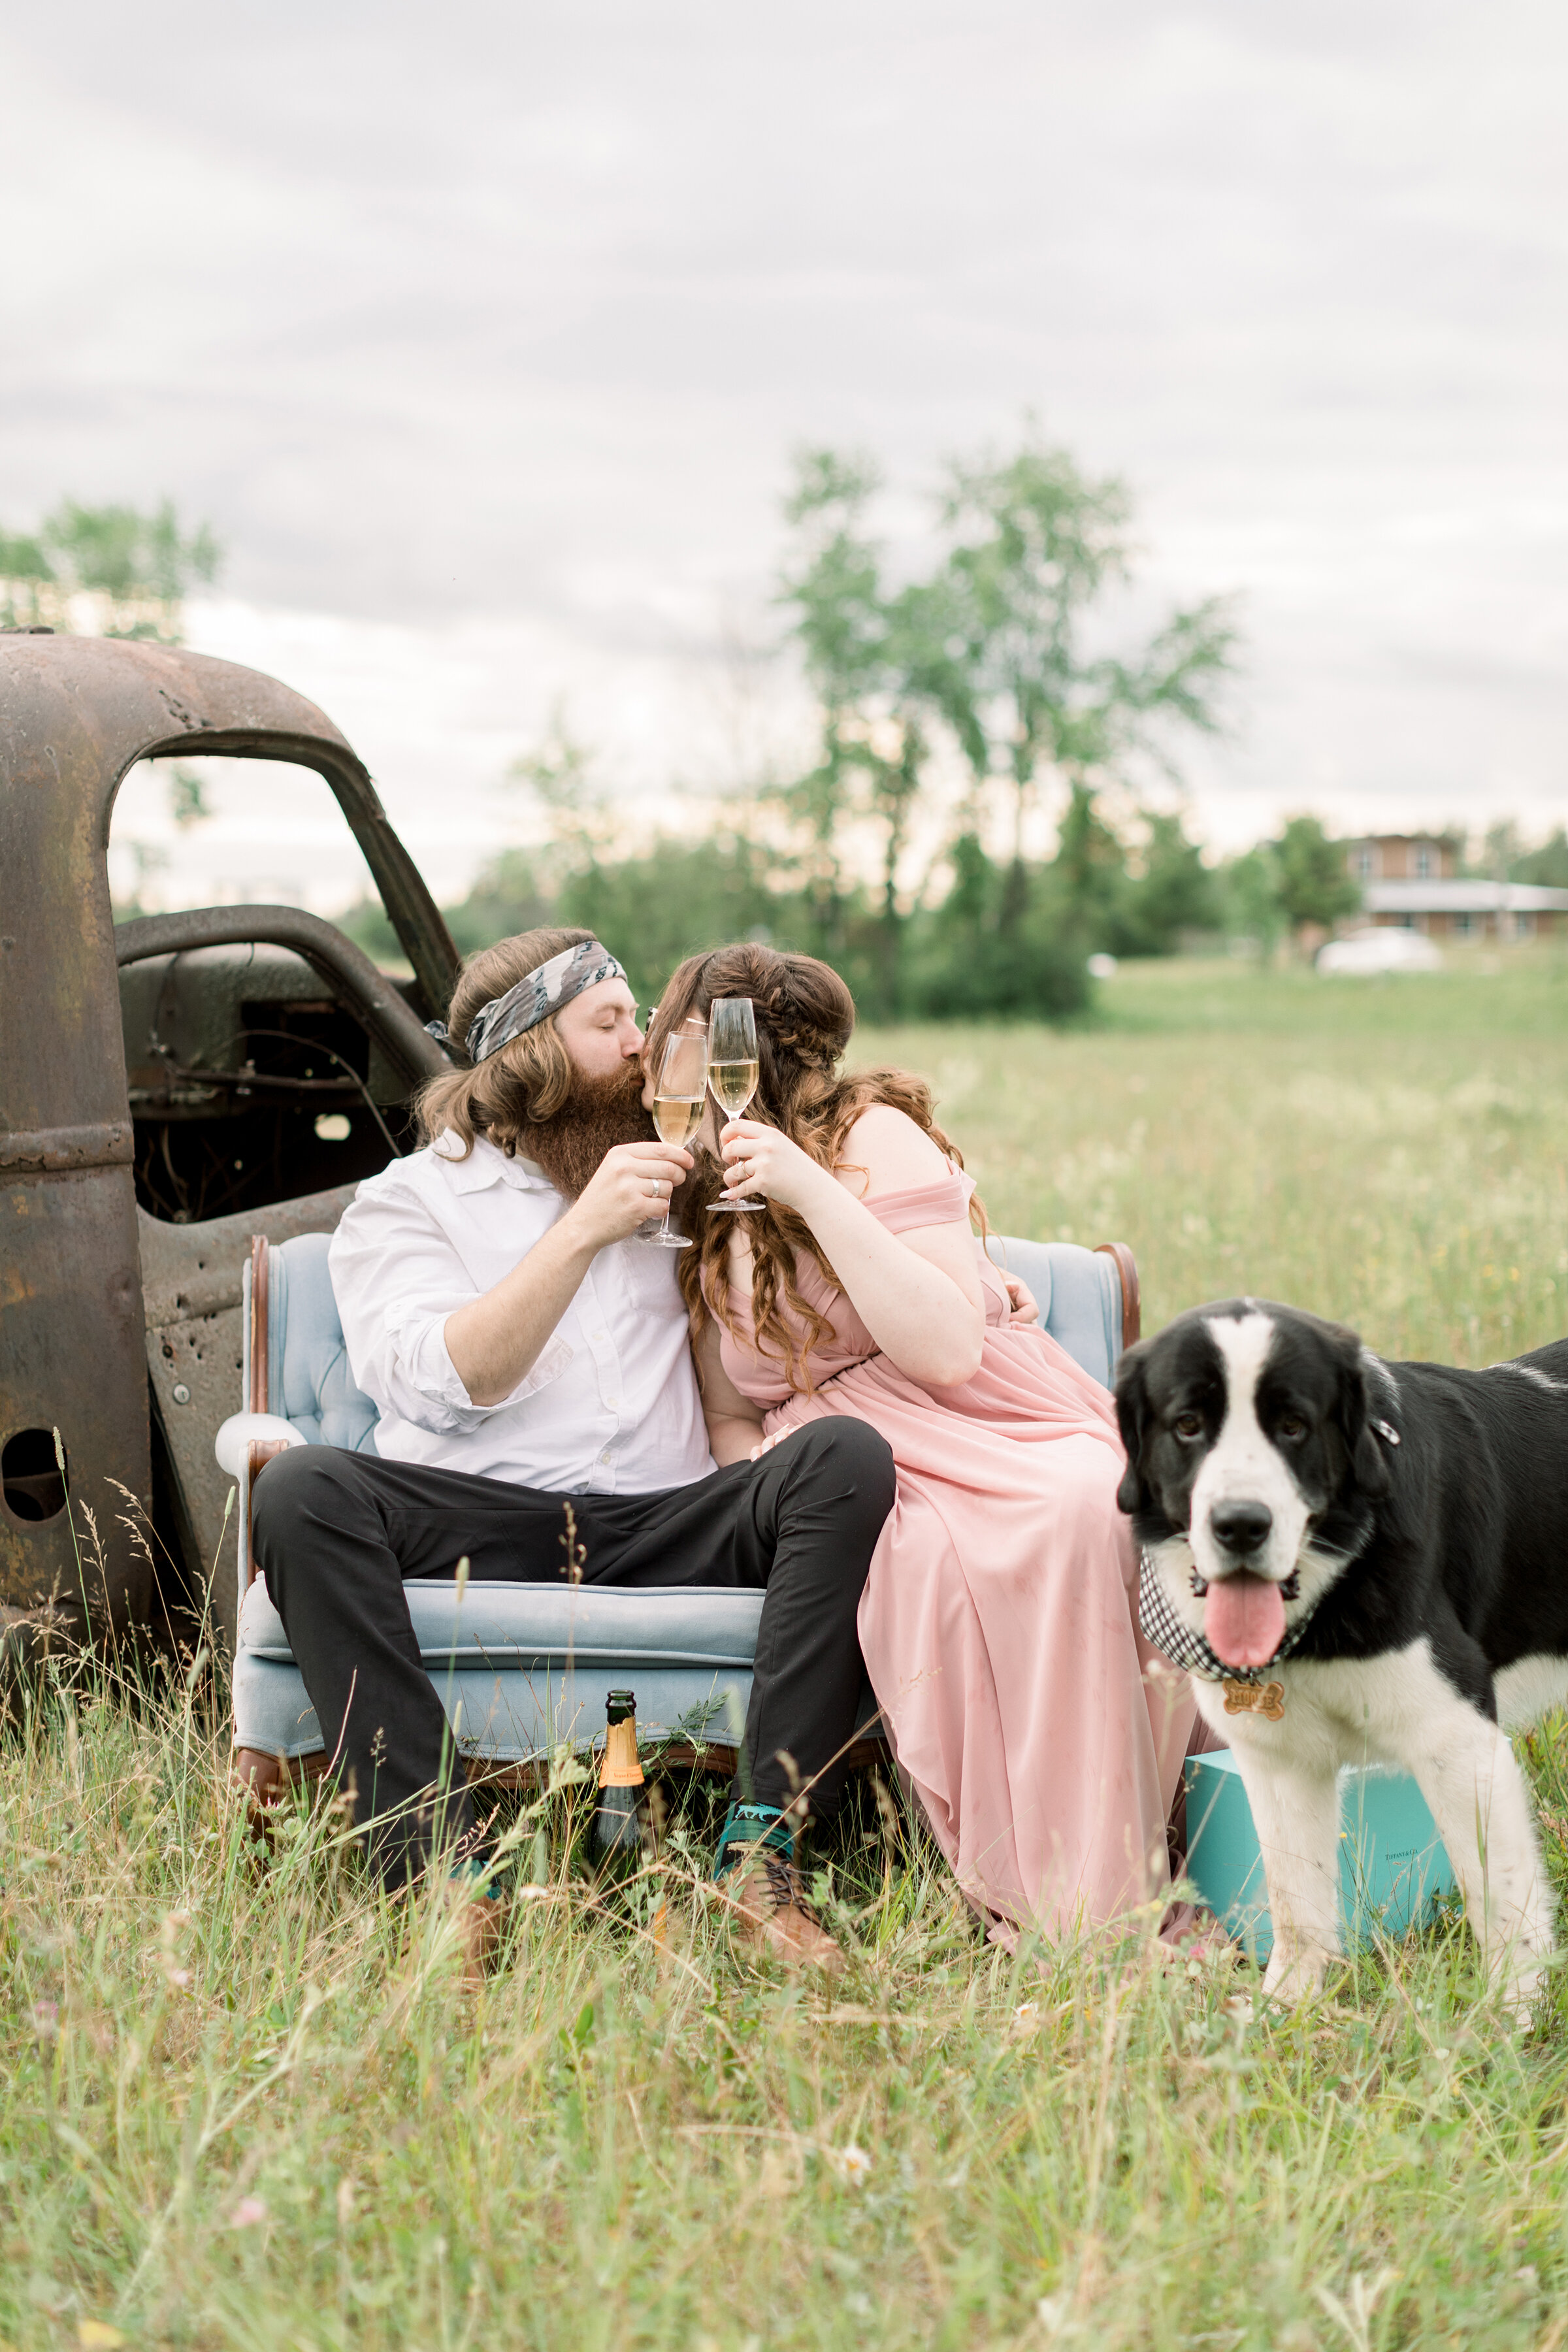  A couple share a kiss and they cheers to a new life together in a beautiful rustic outdoor engagement session by Chelsea Mason Photography. Couple pose with dog inspiration ideas and goals engagement session inspiration ideas and goals location insp